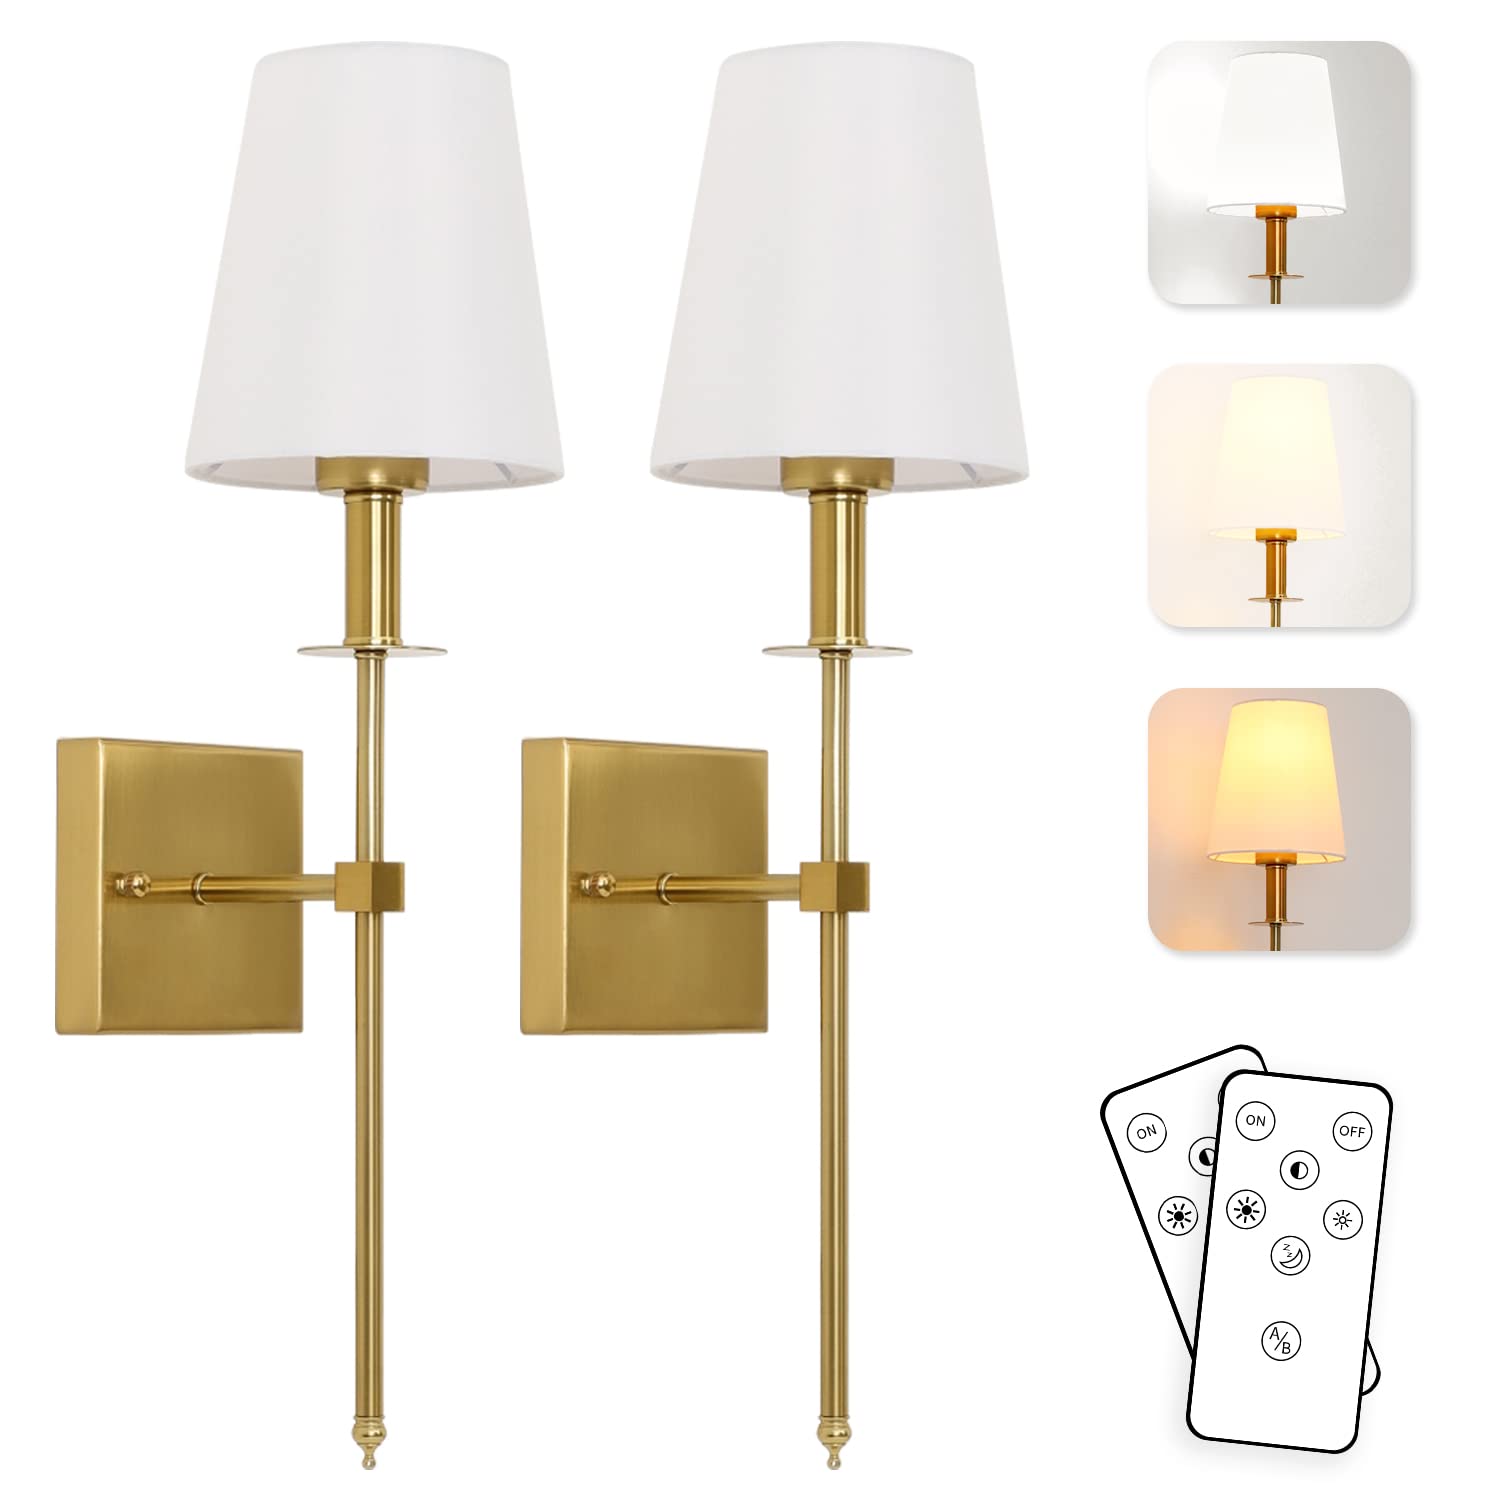 Wall Lights Battery Operated Wall Sconce Set Of Two, Non Hardwired Fixture, with Remote Control Dimmable Light Bulb, 2 Pack